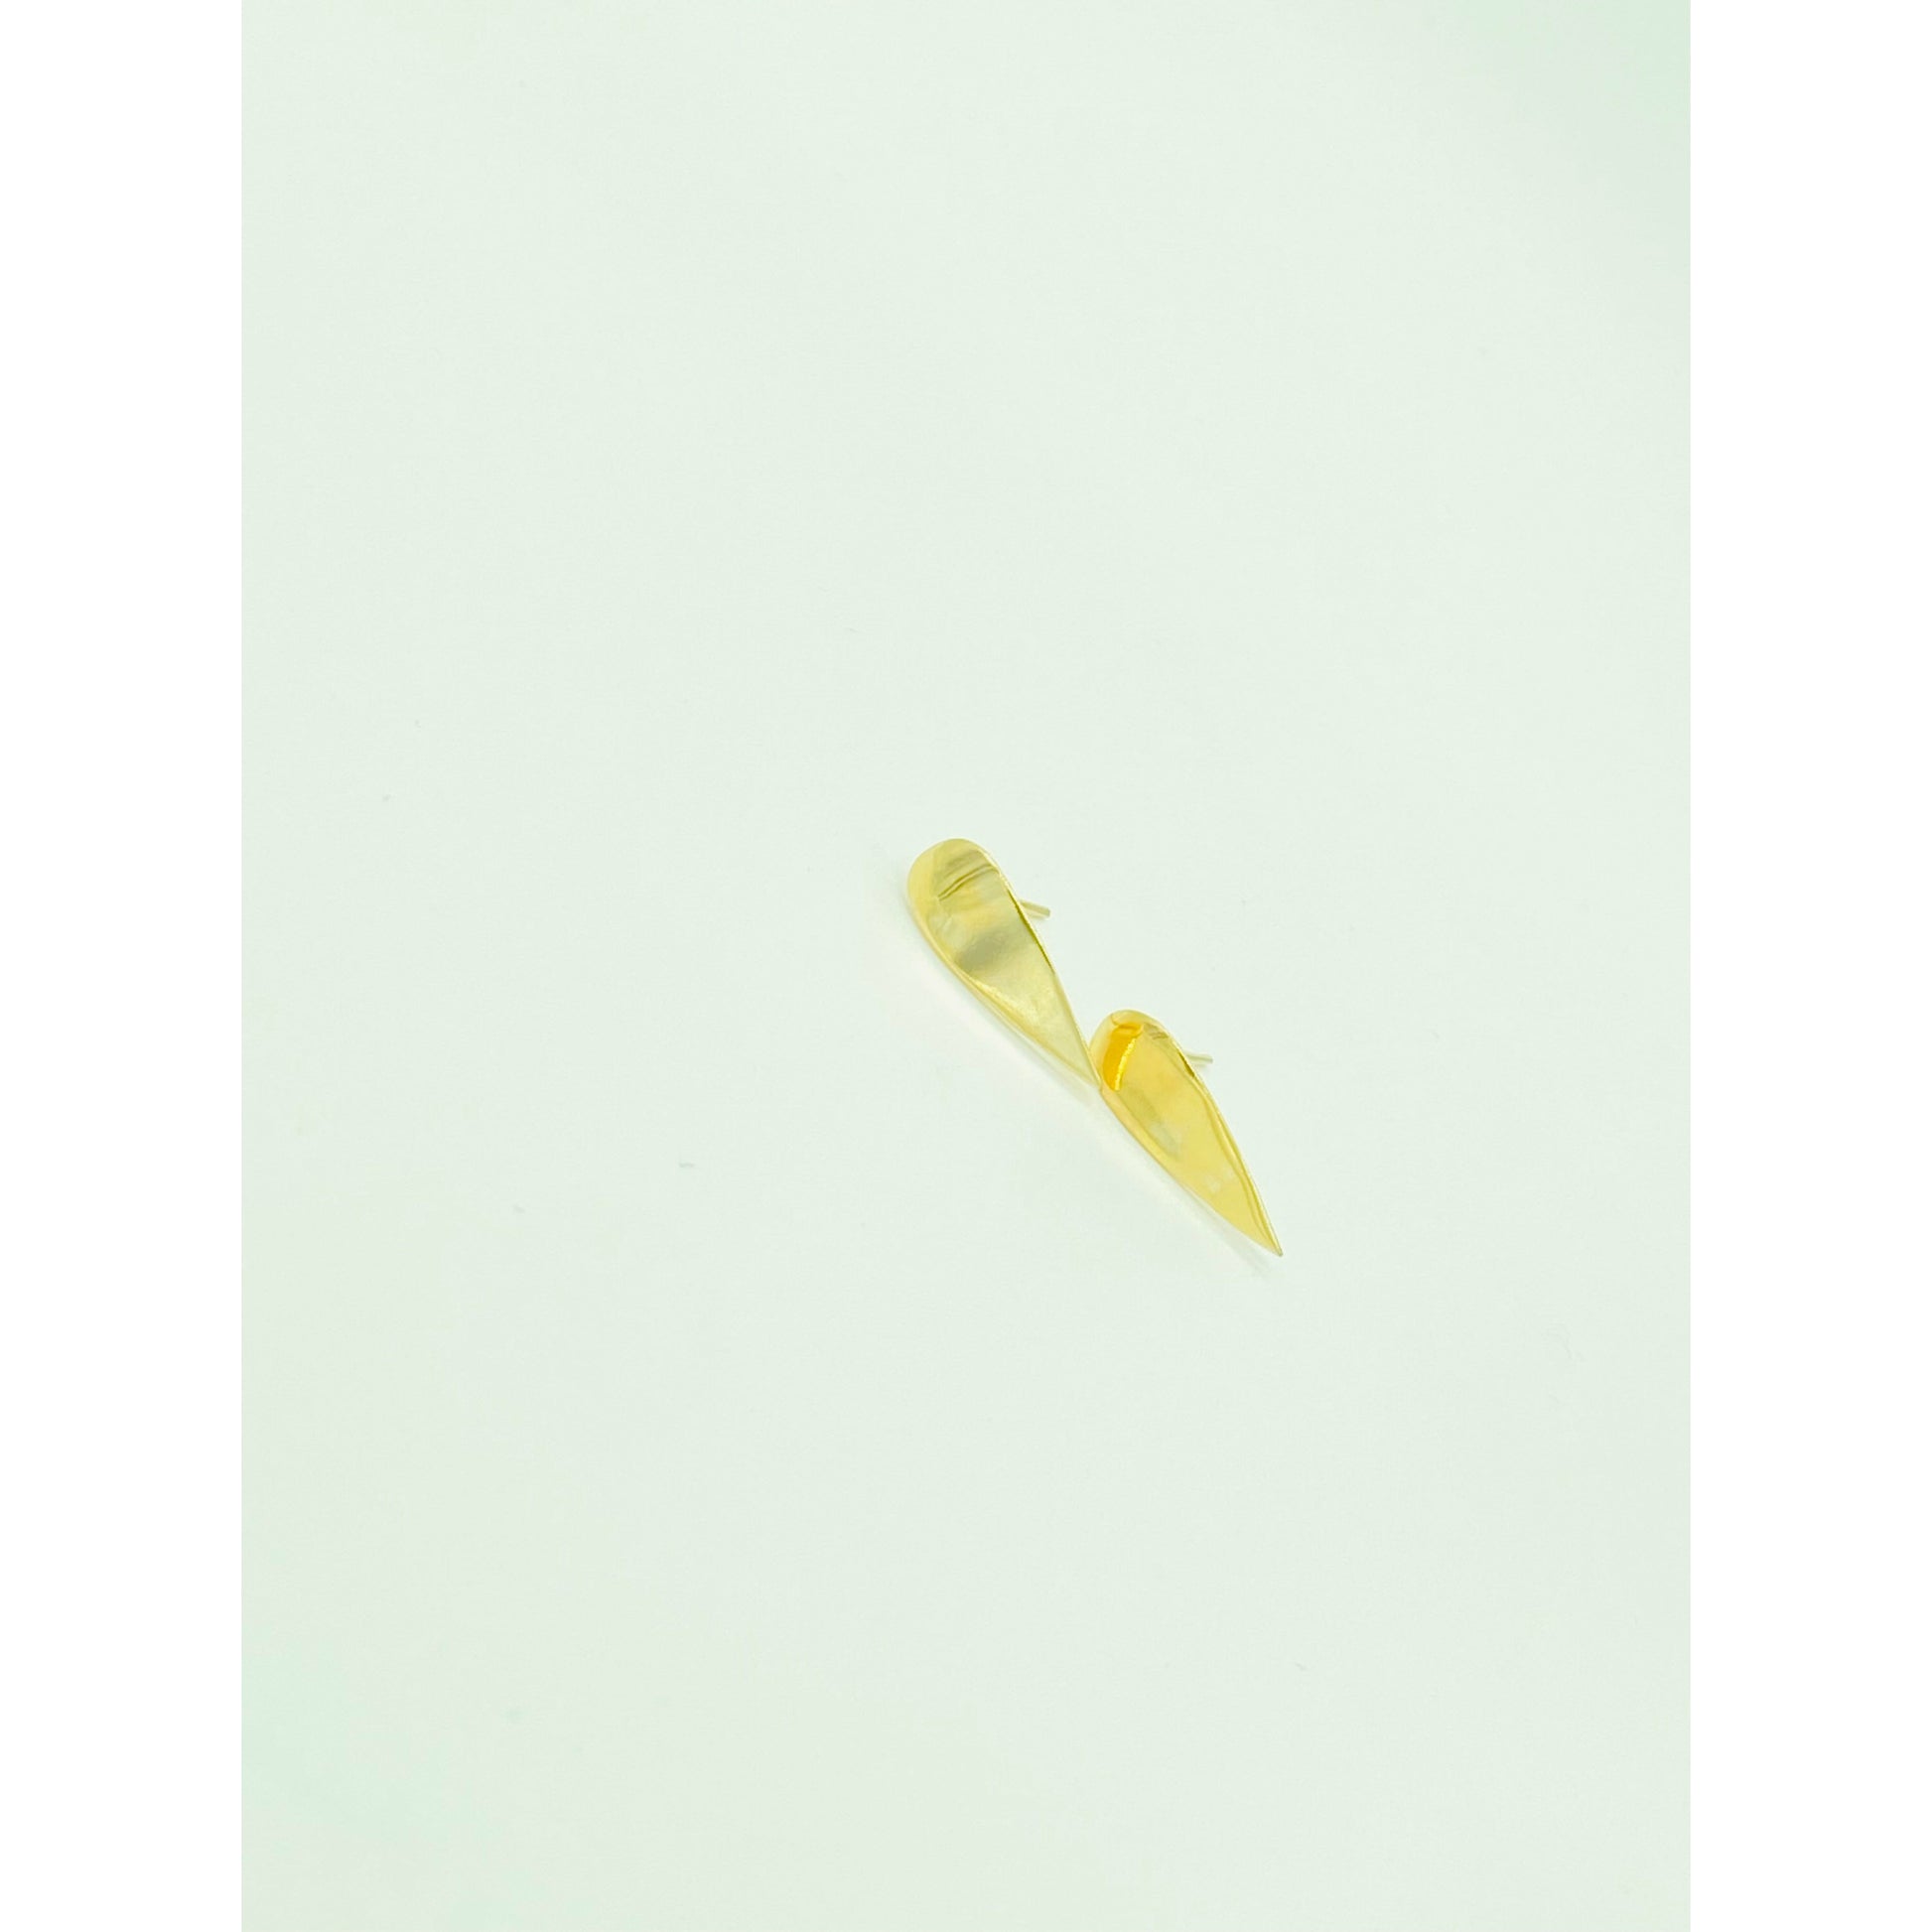 Gold spike earrings with point facing down.